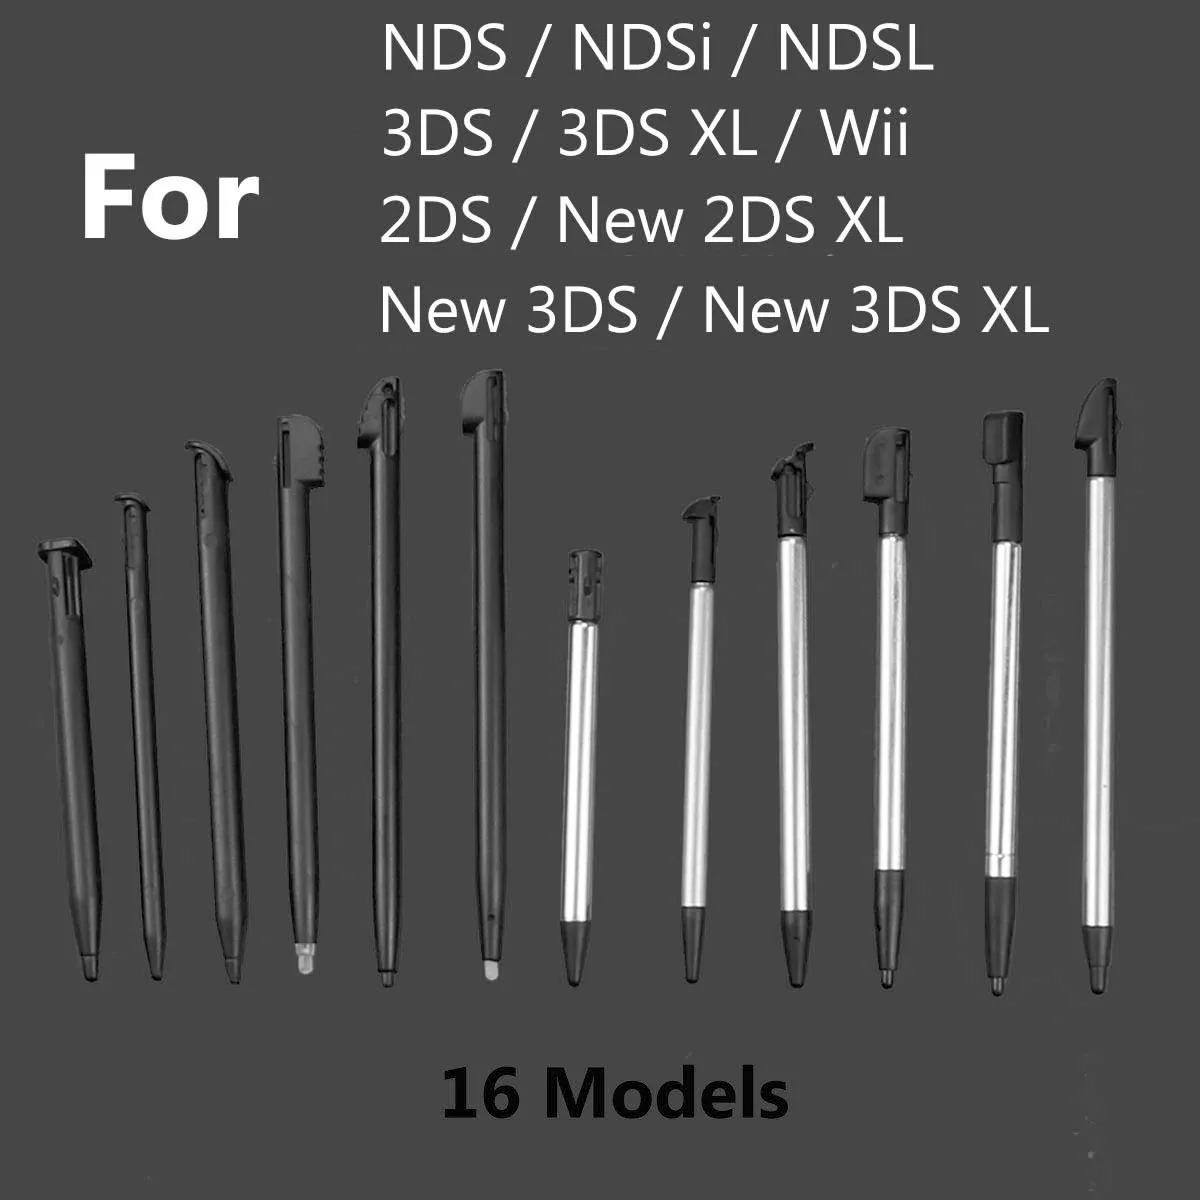 

10PCS Metal Telescopic Stylus Plastic Stylus Touch Screen Pen for 2DS 3DS New 2DS LL XL New 3DS XL For NDSL DS Lite NDSi NDS Wii